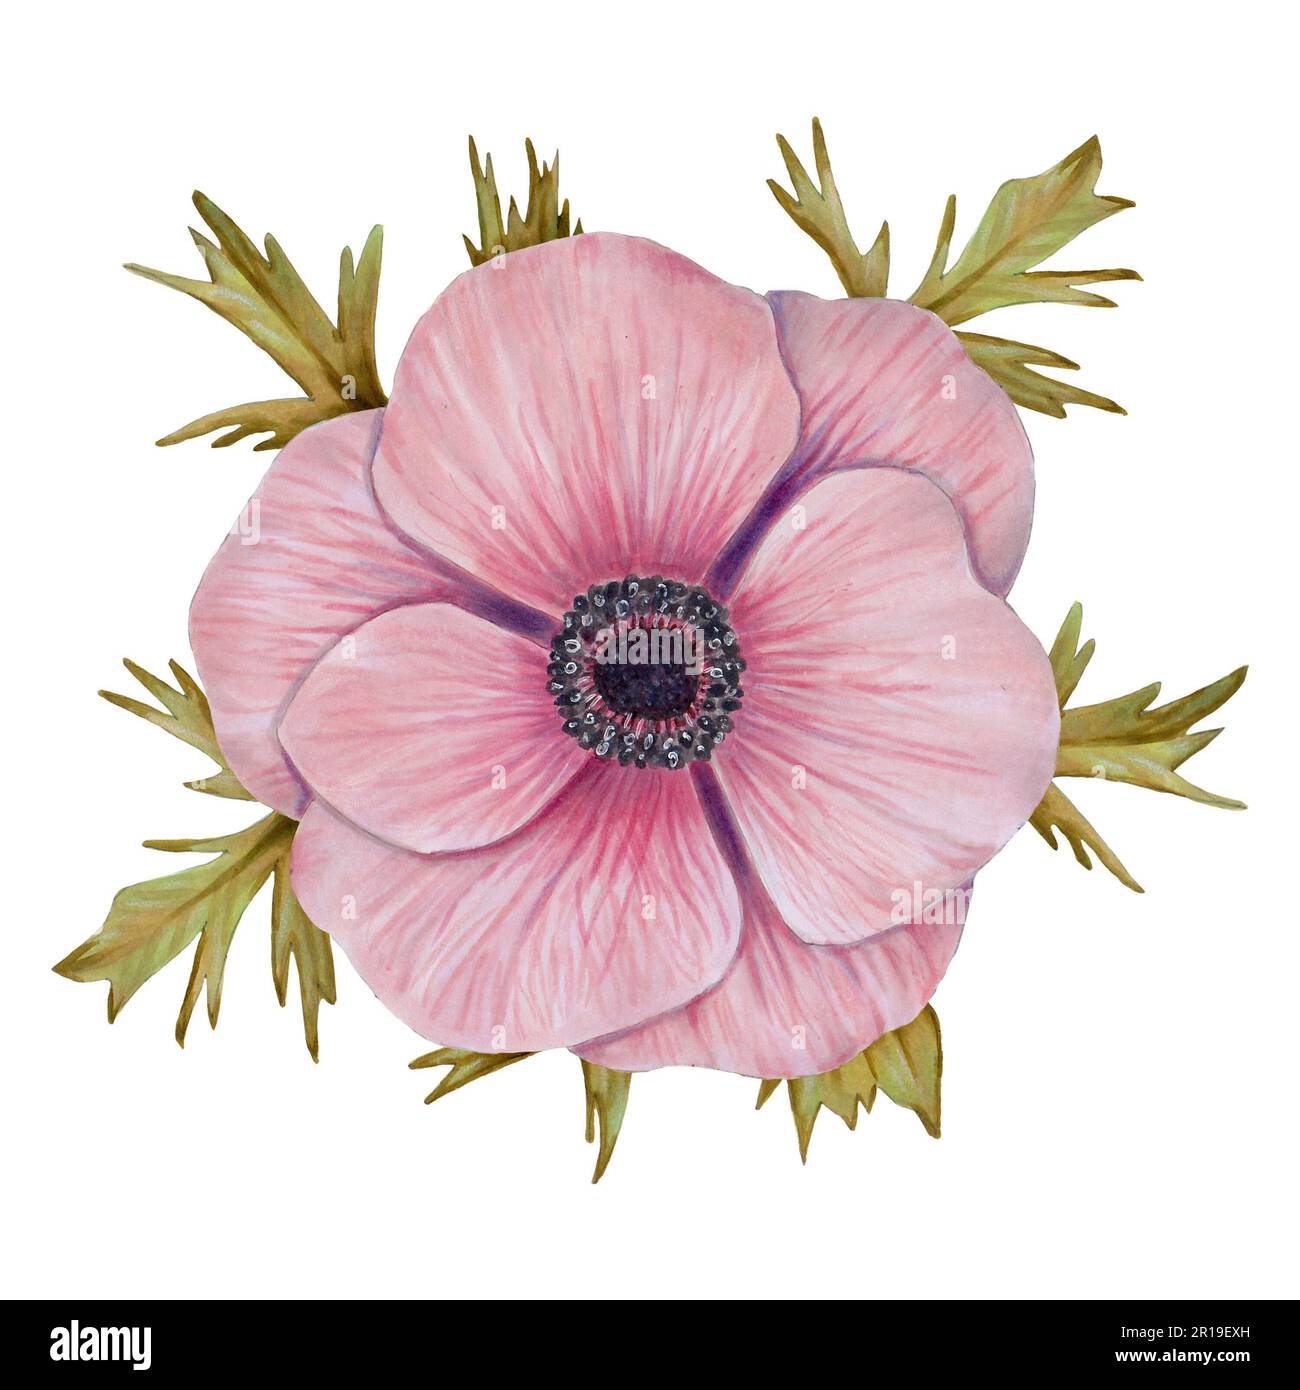 images stock - anemone hi-res photography illustration - Page Alamy Botanical and 2